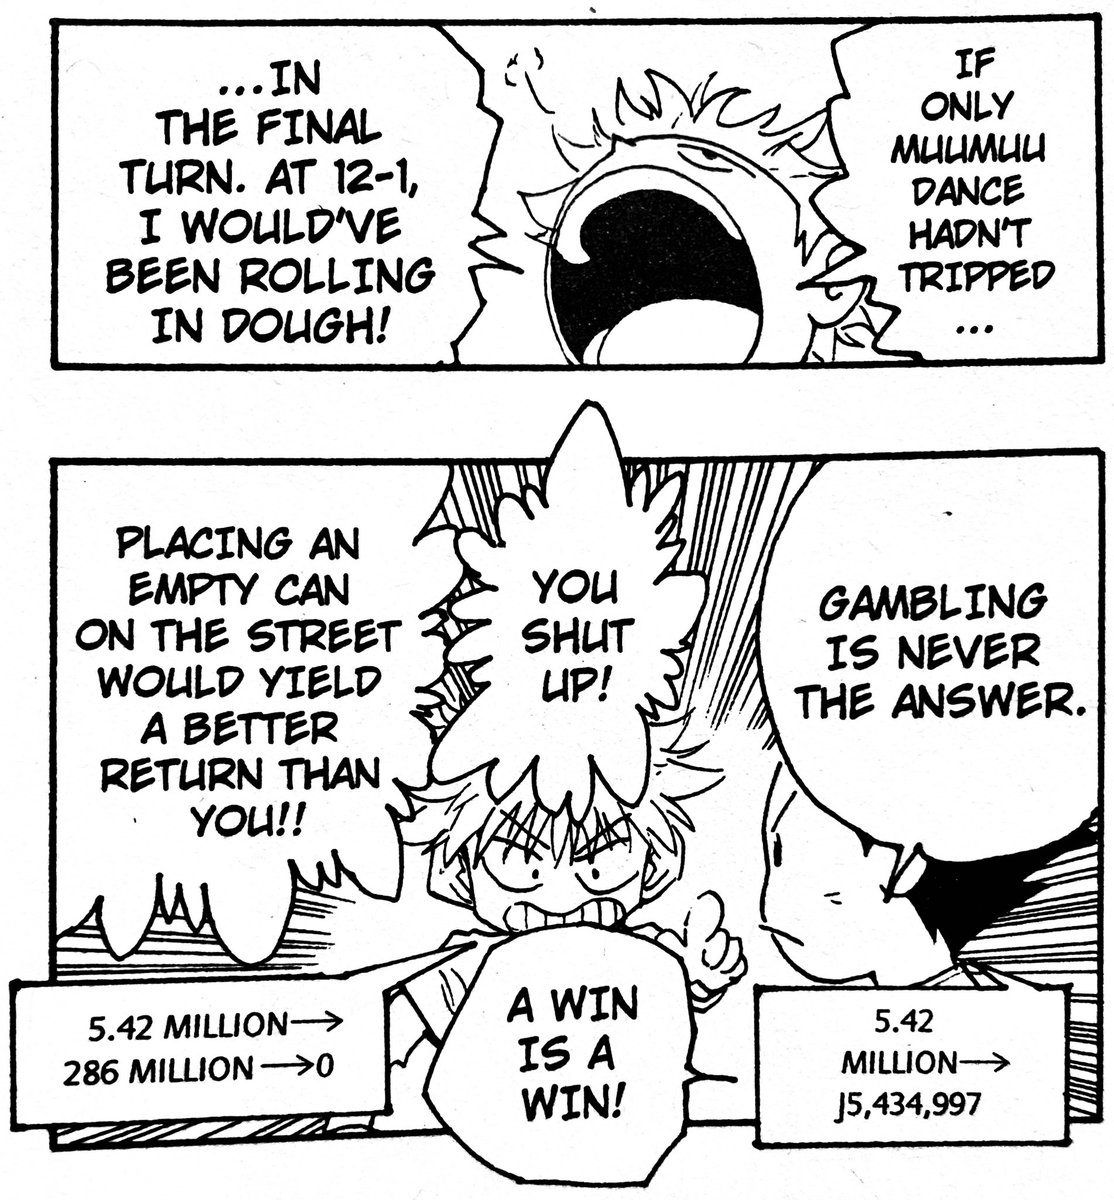 very impressive killua face we have here, plus gon telling us that gambling is never the answer